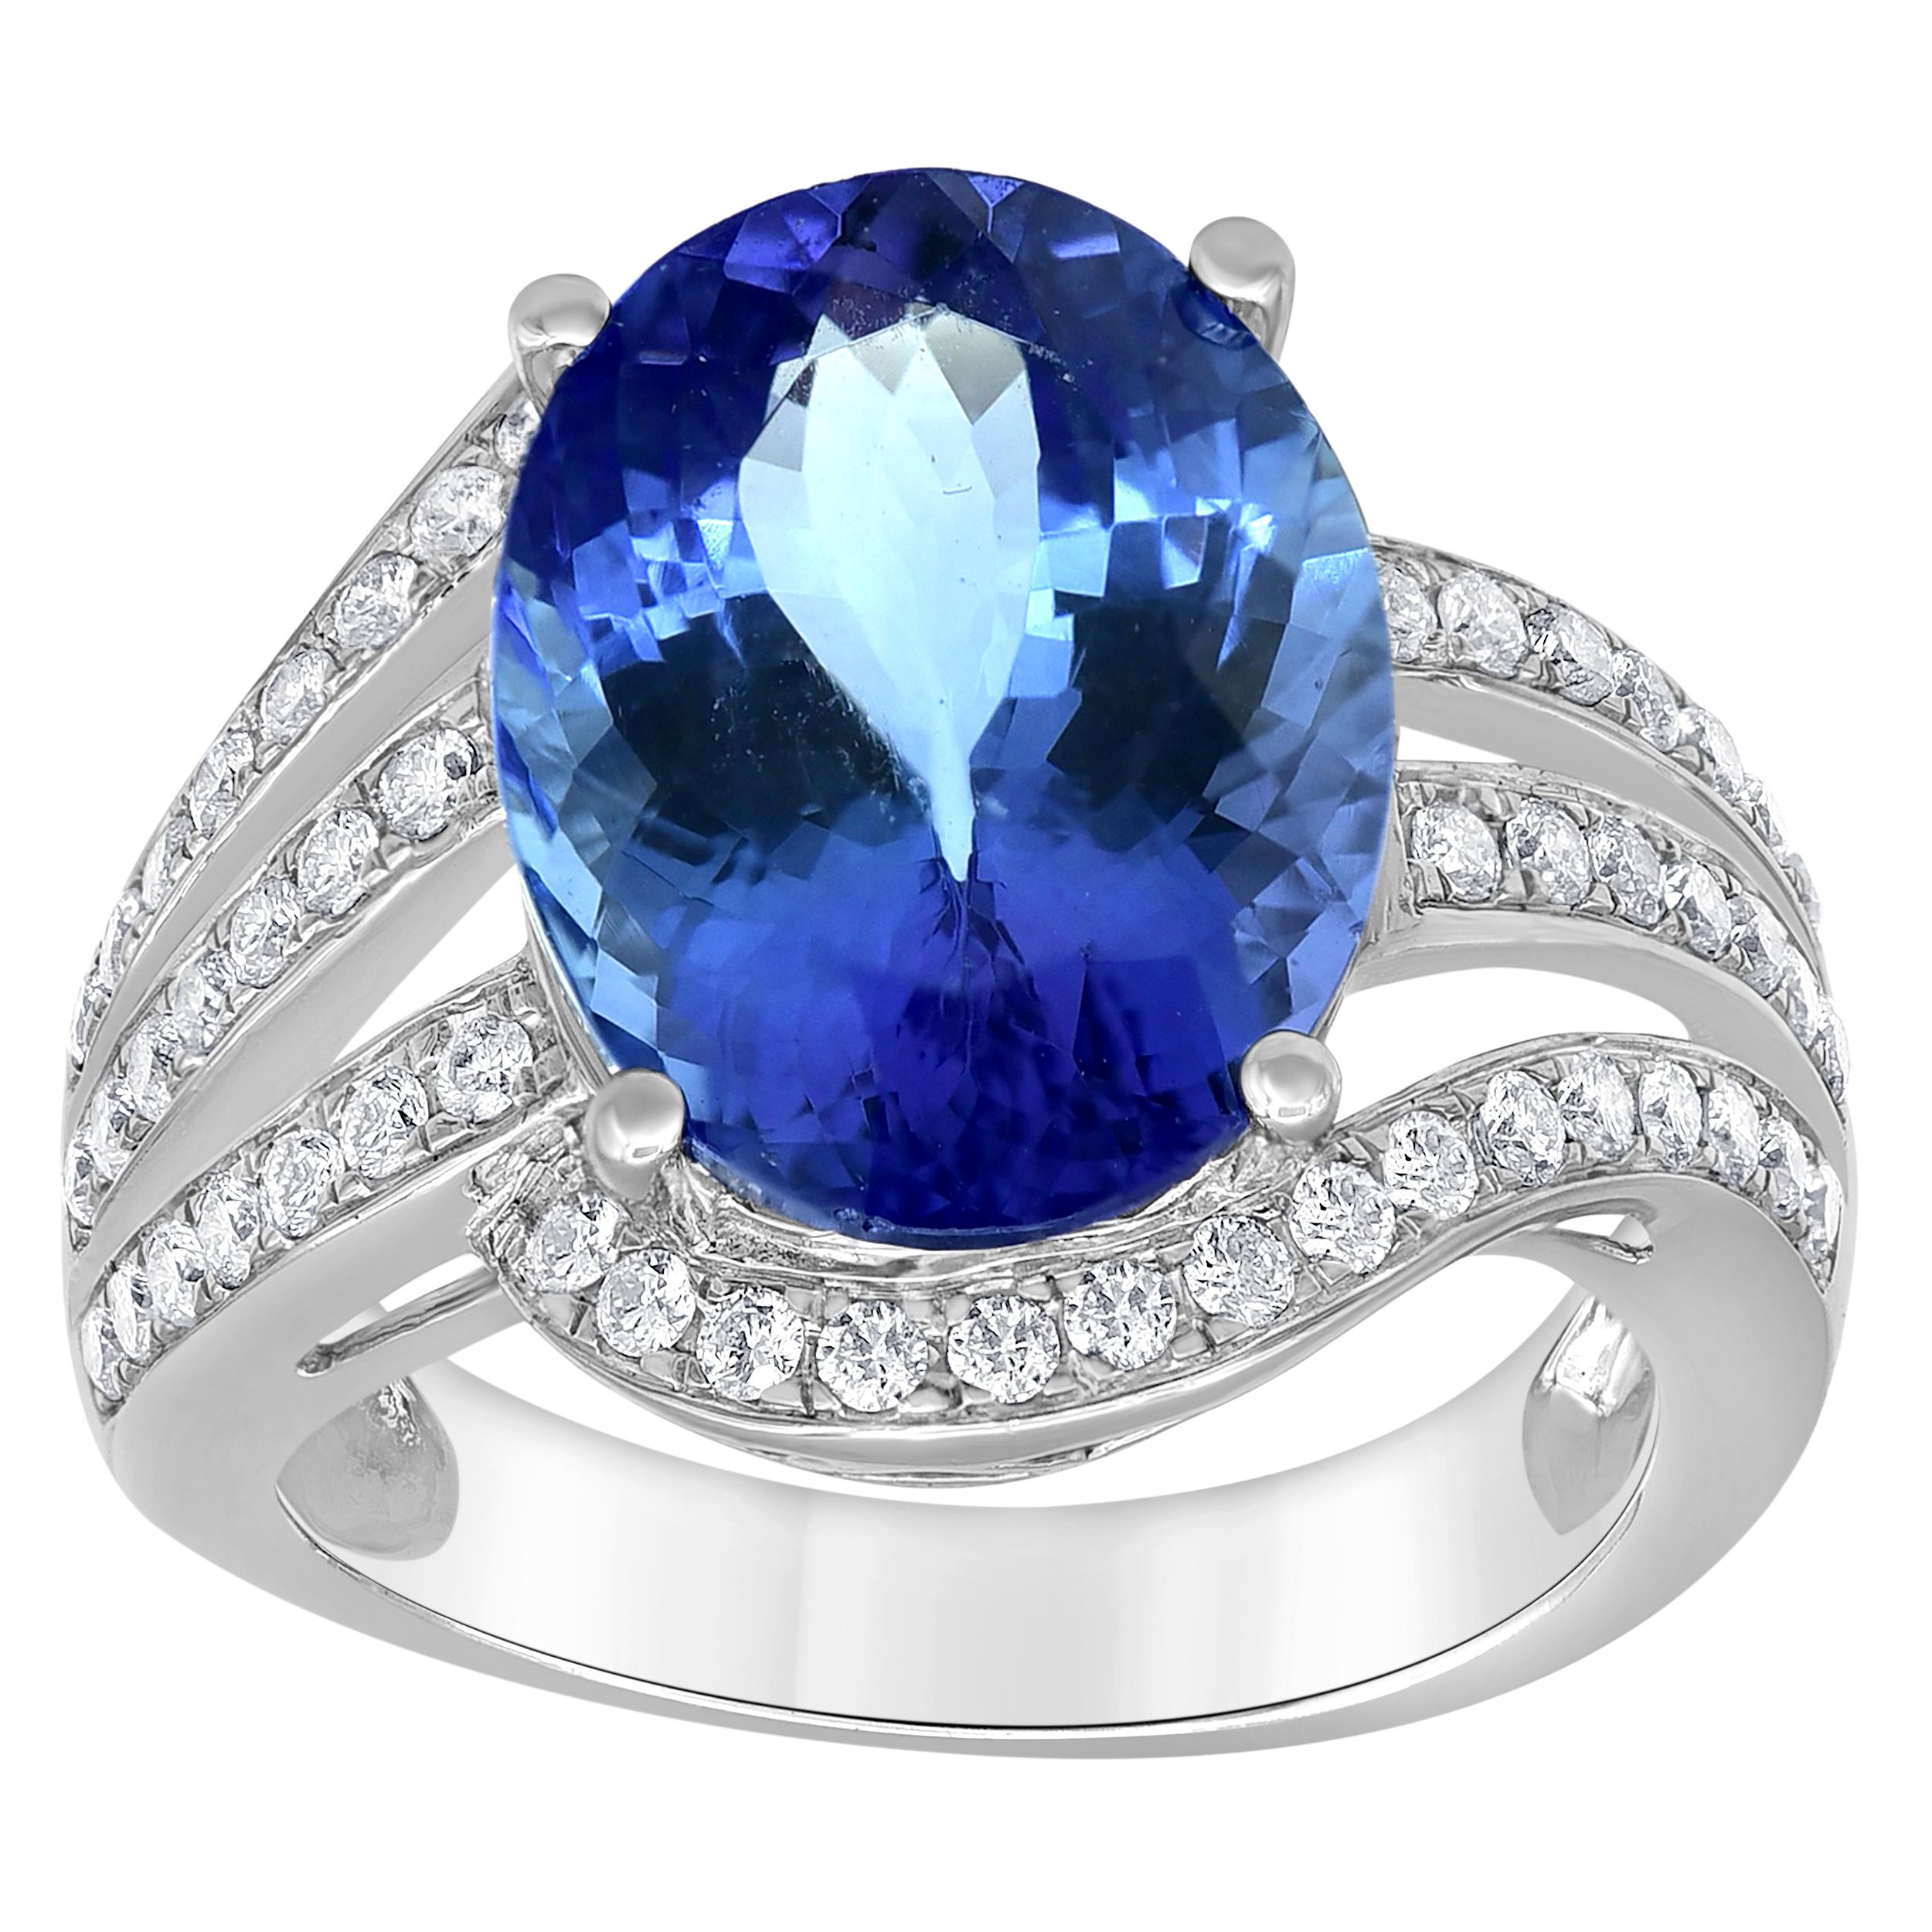 This ring features a gorgeous 8.30-carat oval-shaped Tanzanite. This Tanzanite stone has a stunning “peacock blue” color. The diamond-studded 58 diamond 0.65 carats each with a triple split shank gives this piece a glamorous look.